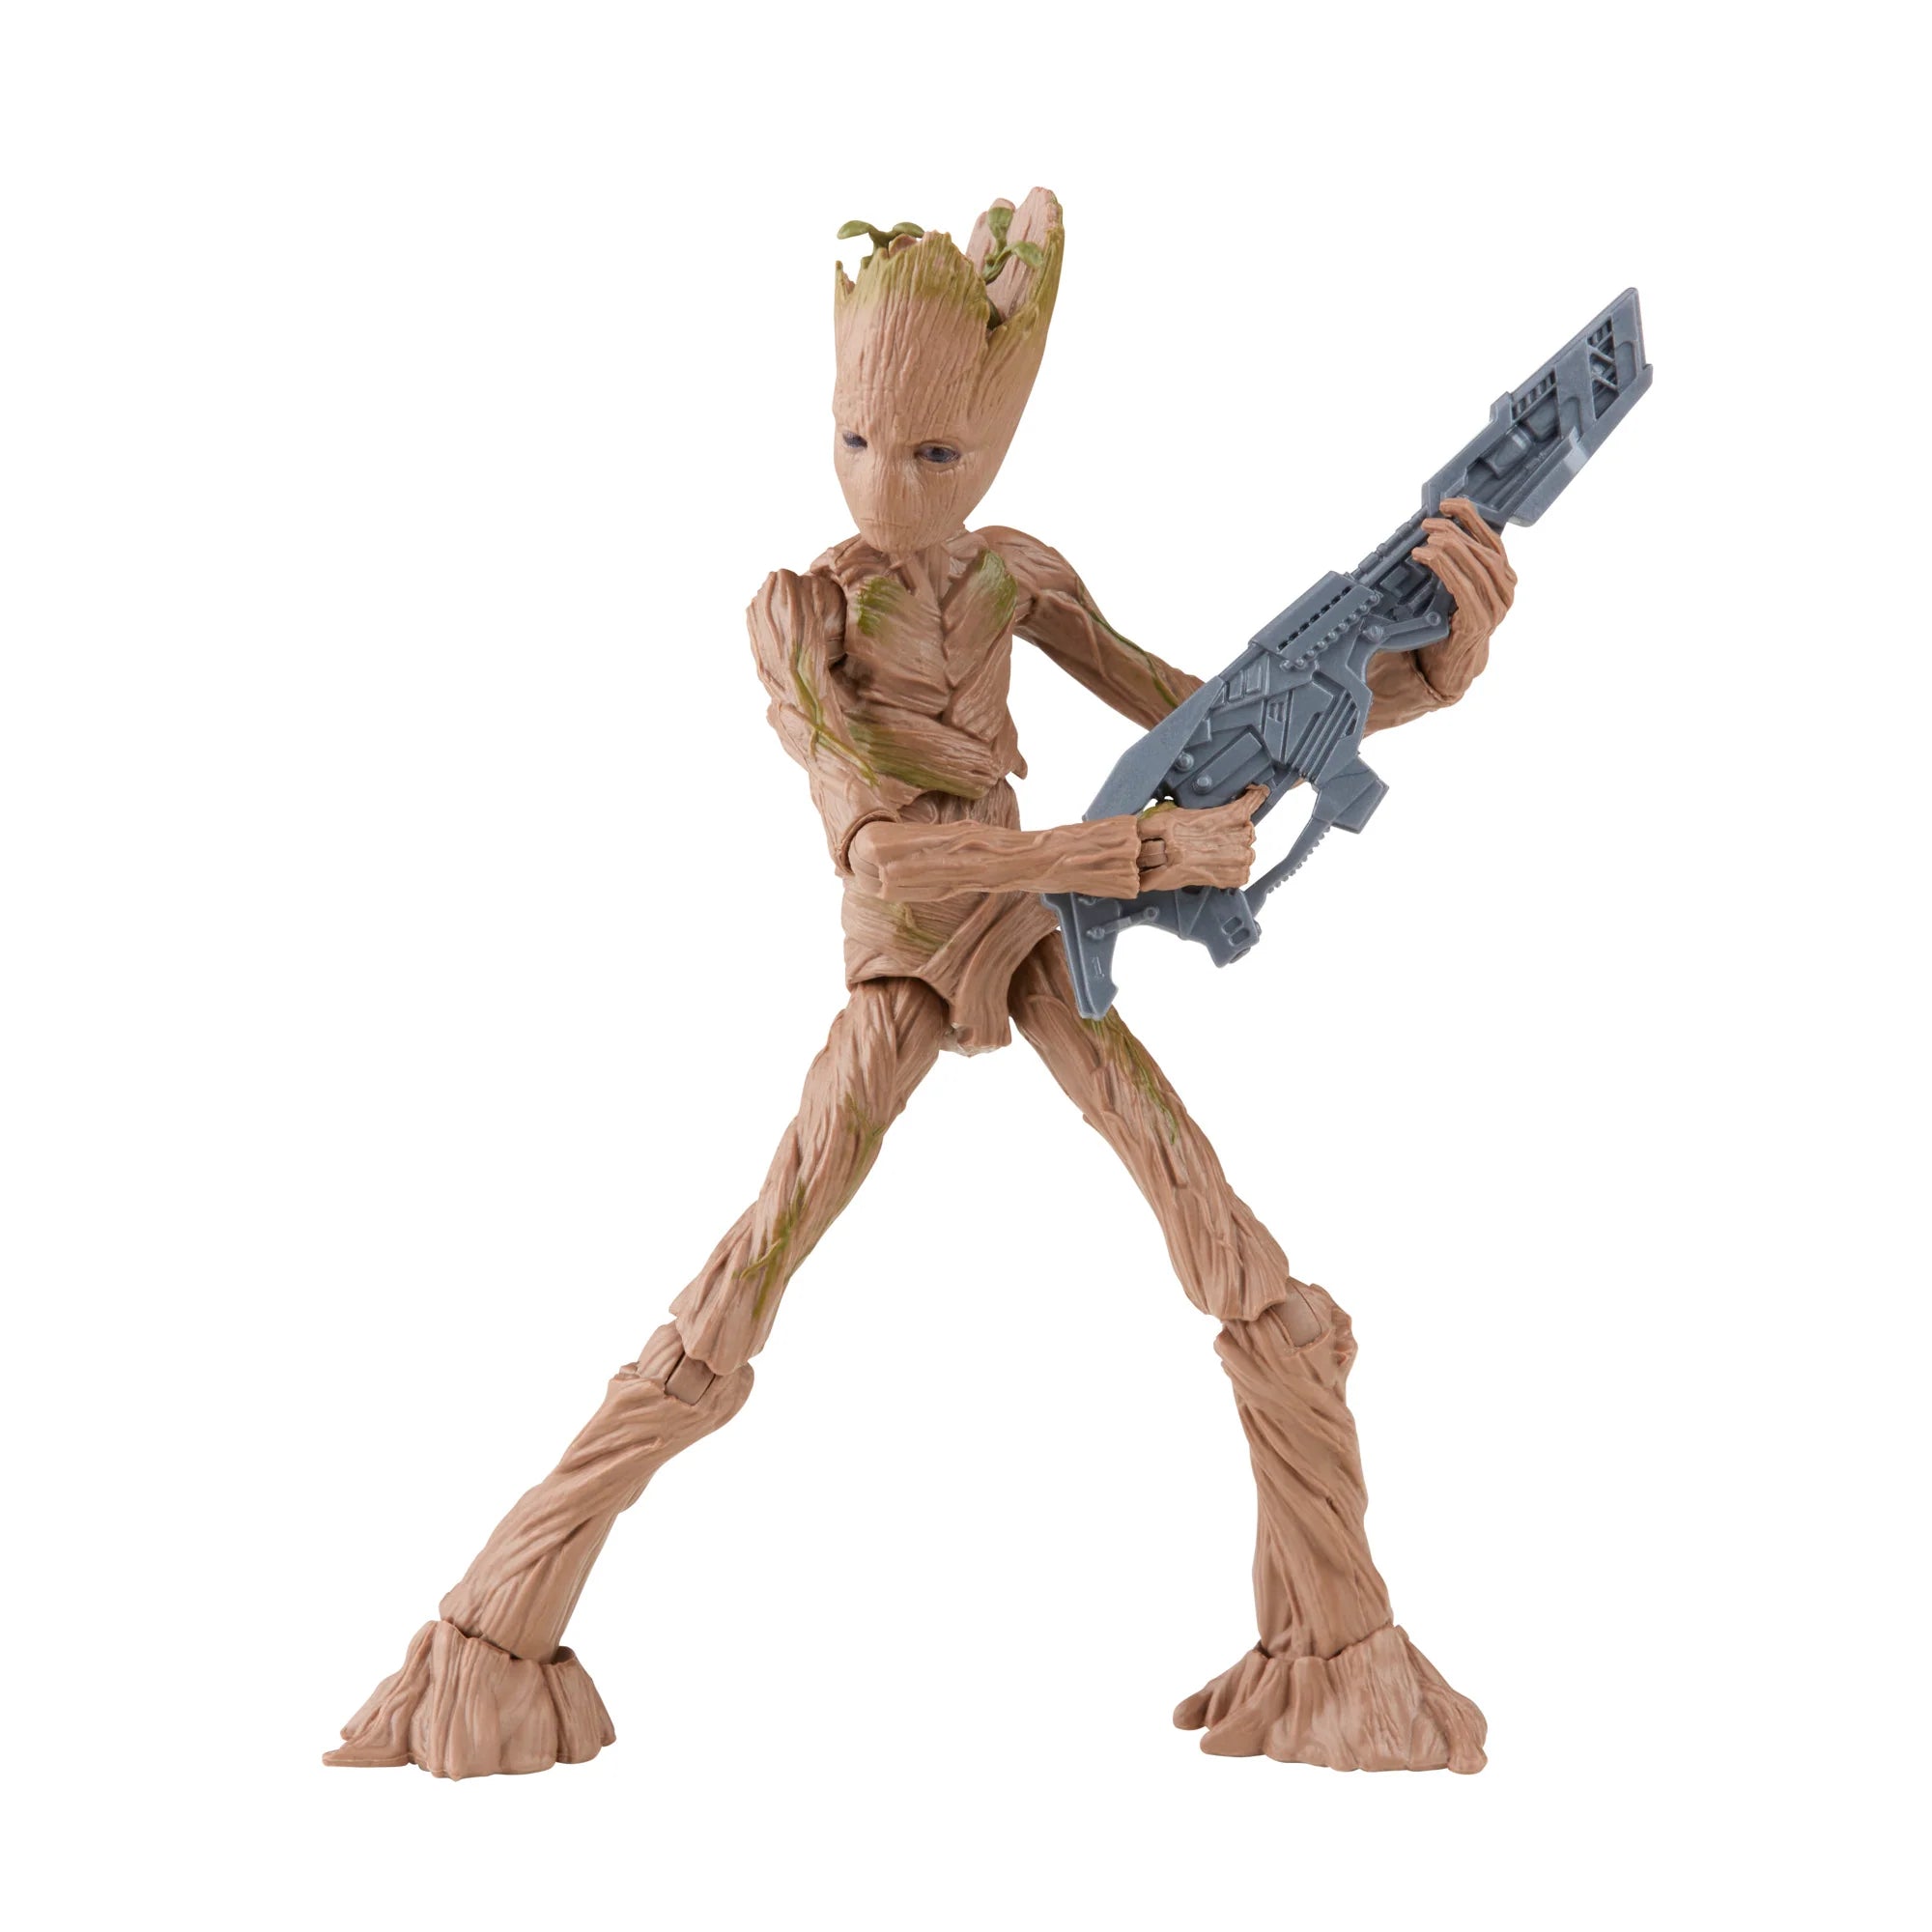 Marvel Legends Thor: Love and Thunder Groot